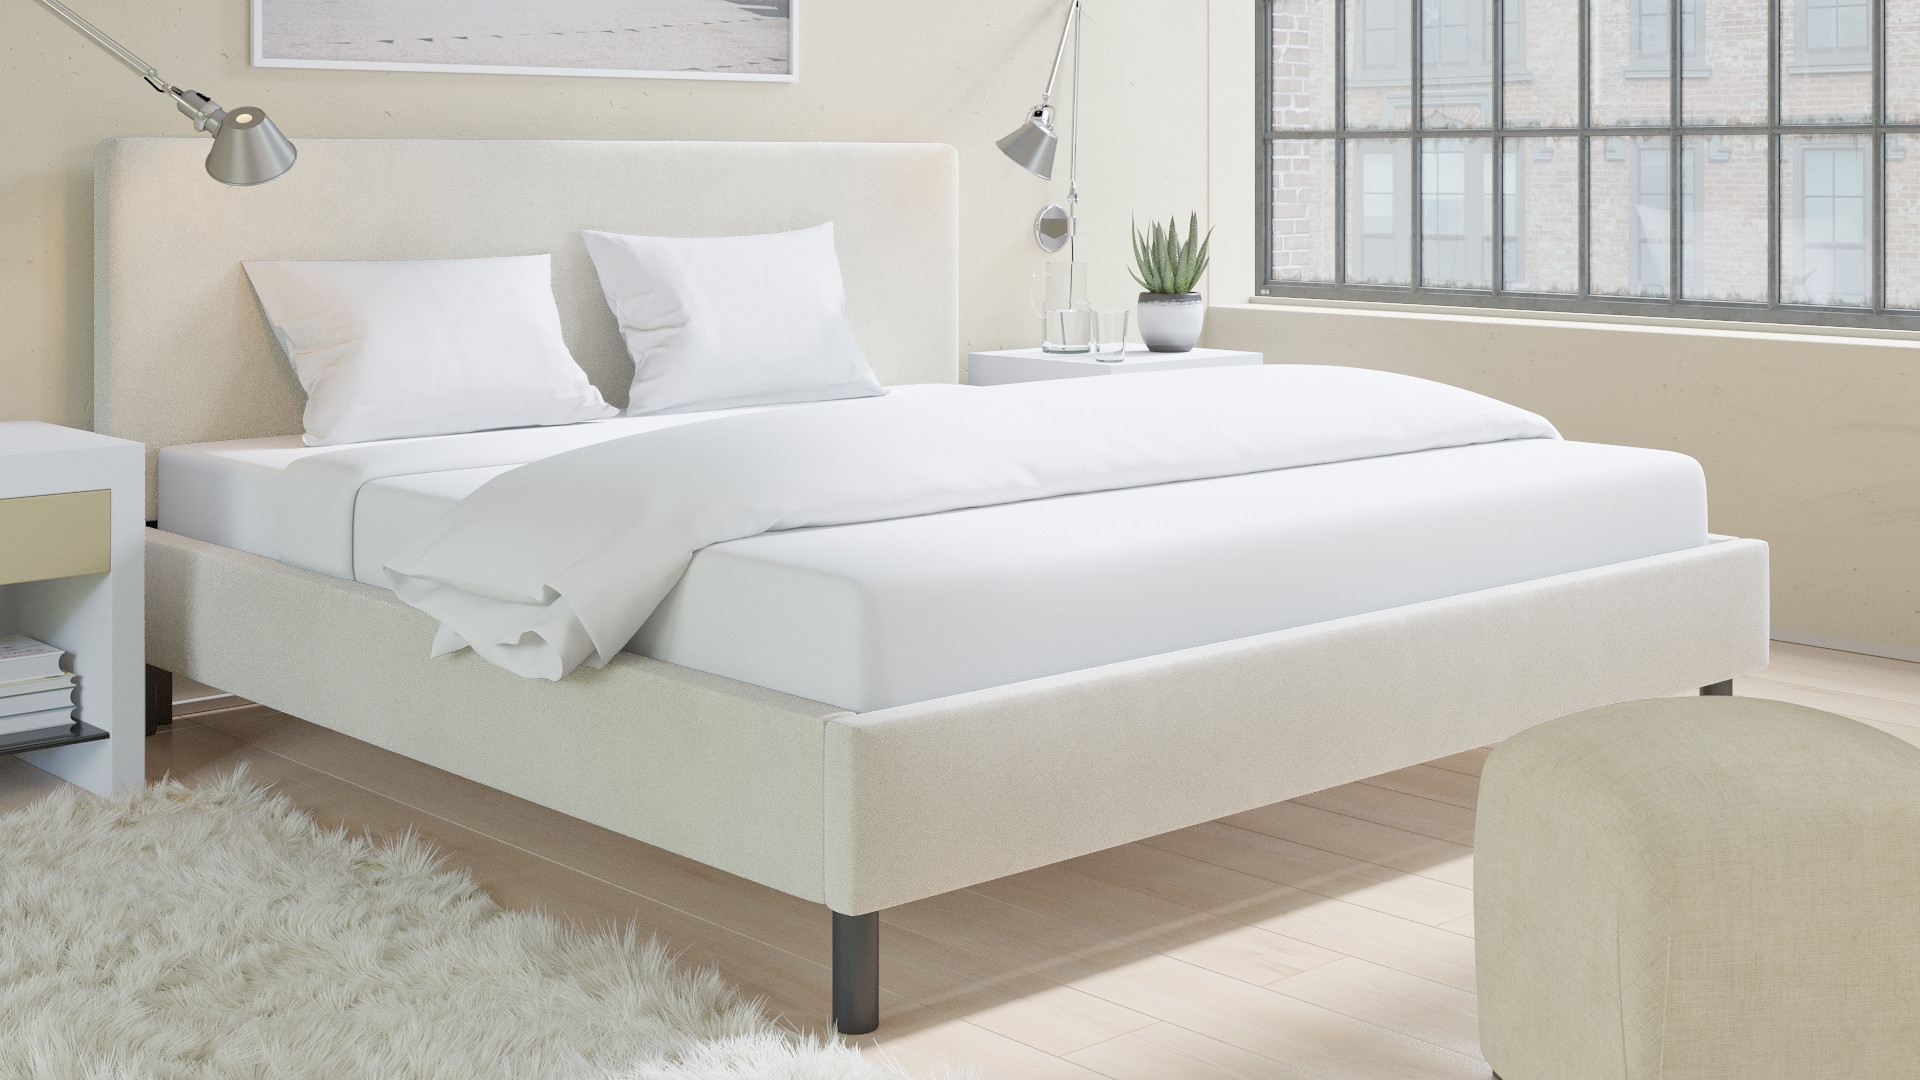 Tailored Platform Bed, Talc Everyday Linen, King - Image 3